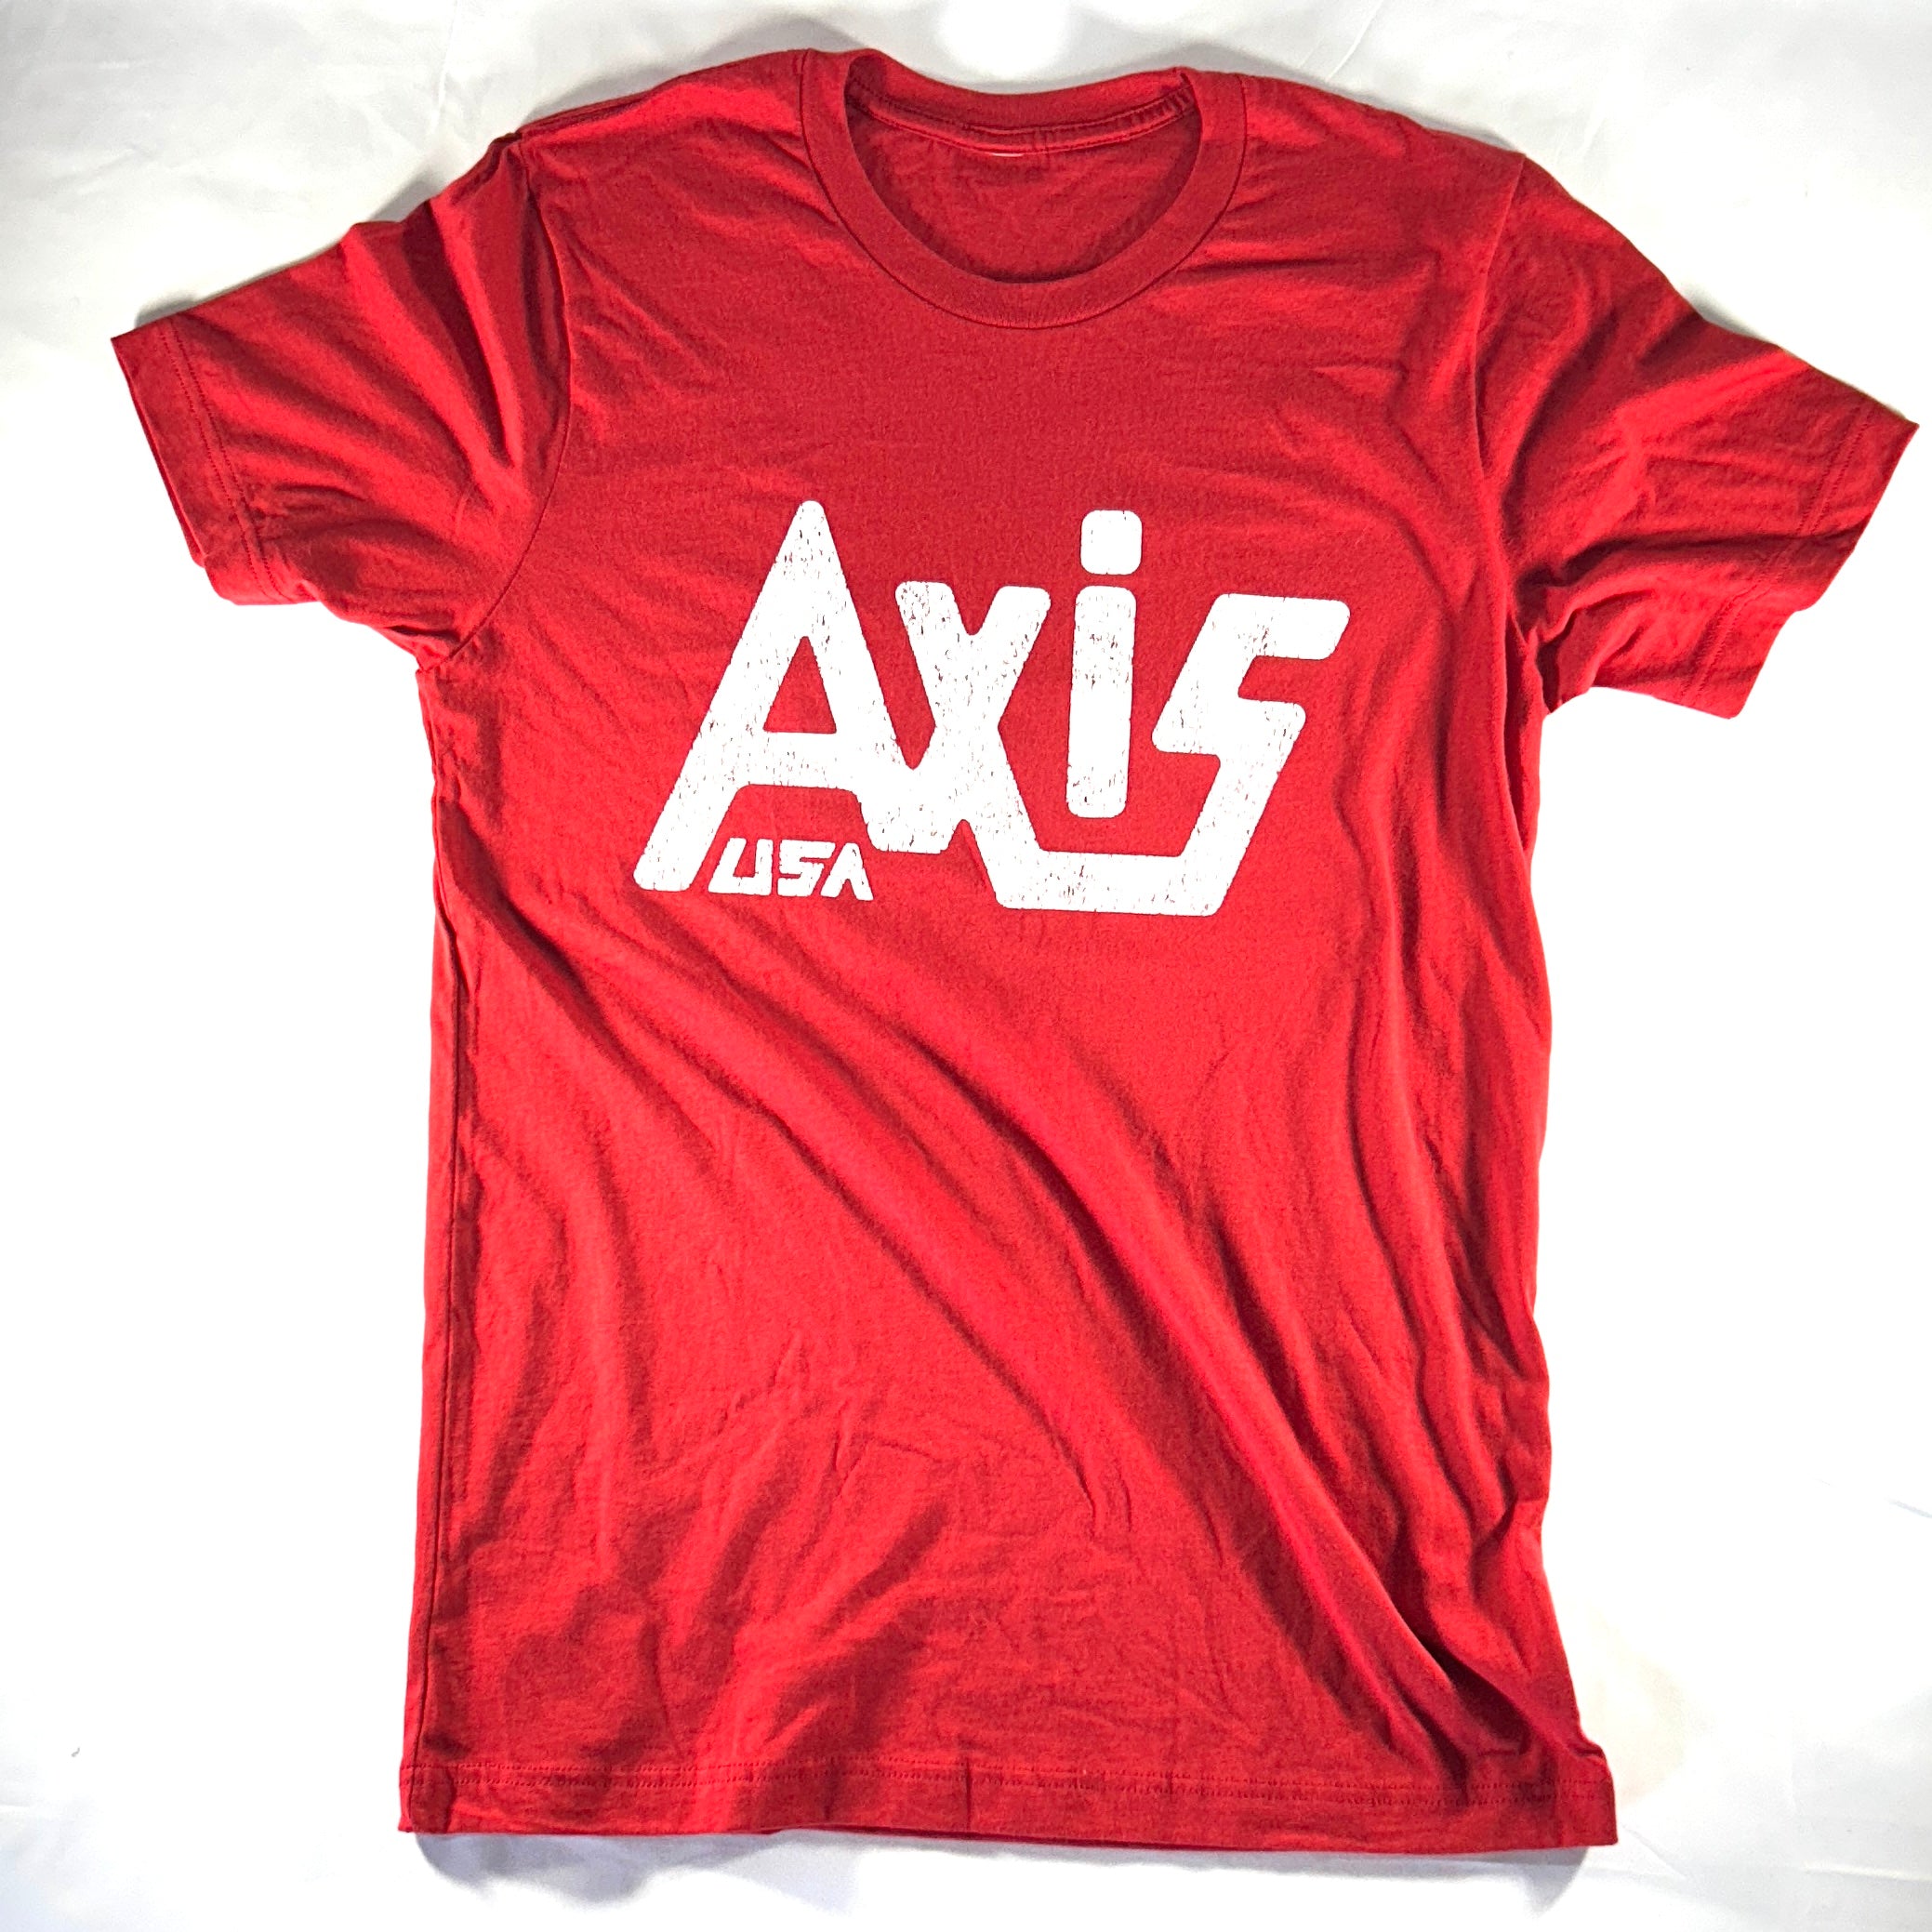 2023 AXiS T-Shirt - Red